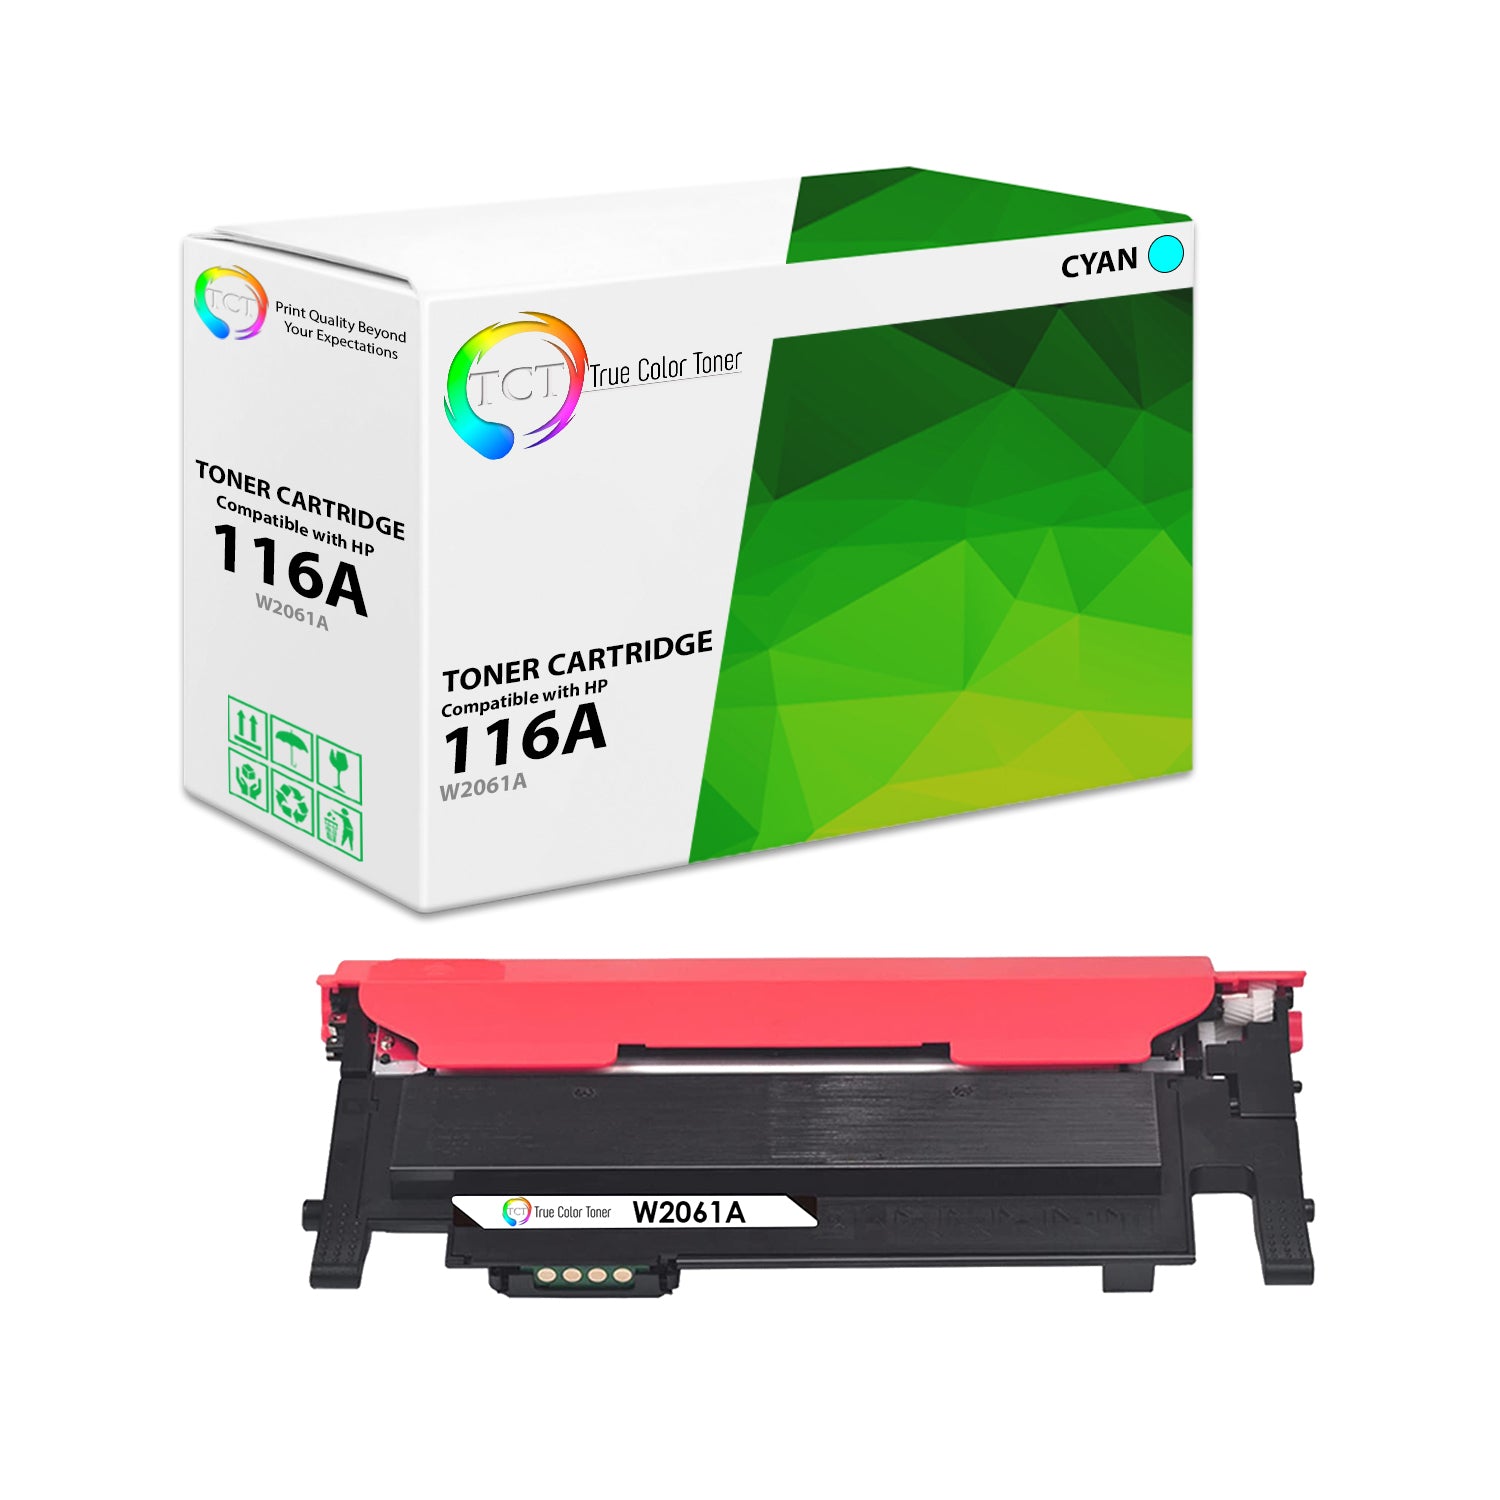 TCT Compatible Toner Cartridge Replacement for the HP 116A Series - 1 Pack Cyan